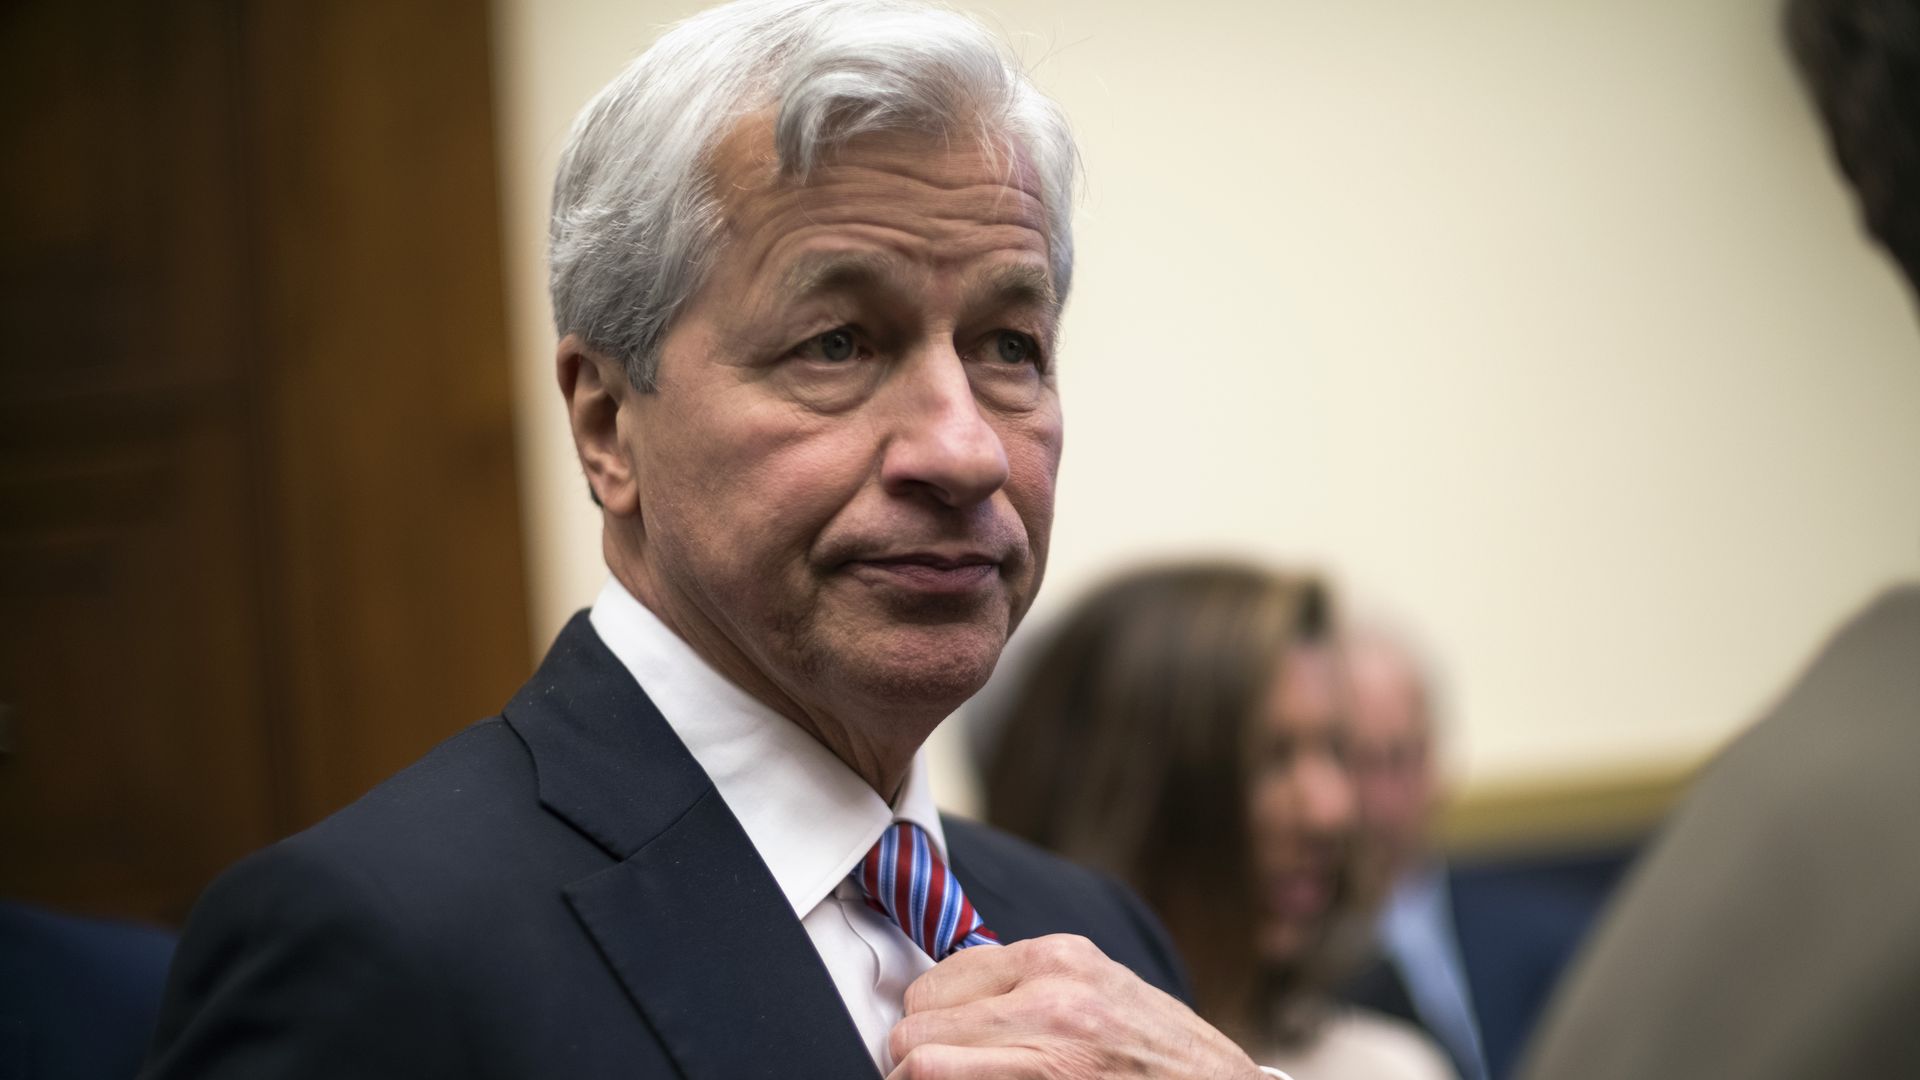 Jamie Dimon, Chair and CEO of JP Morgan Chase, takes his seat to testify before the House Financial Services Commitee in Washington Wednesday April 10